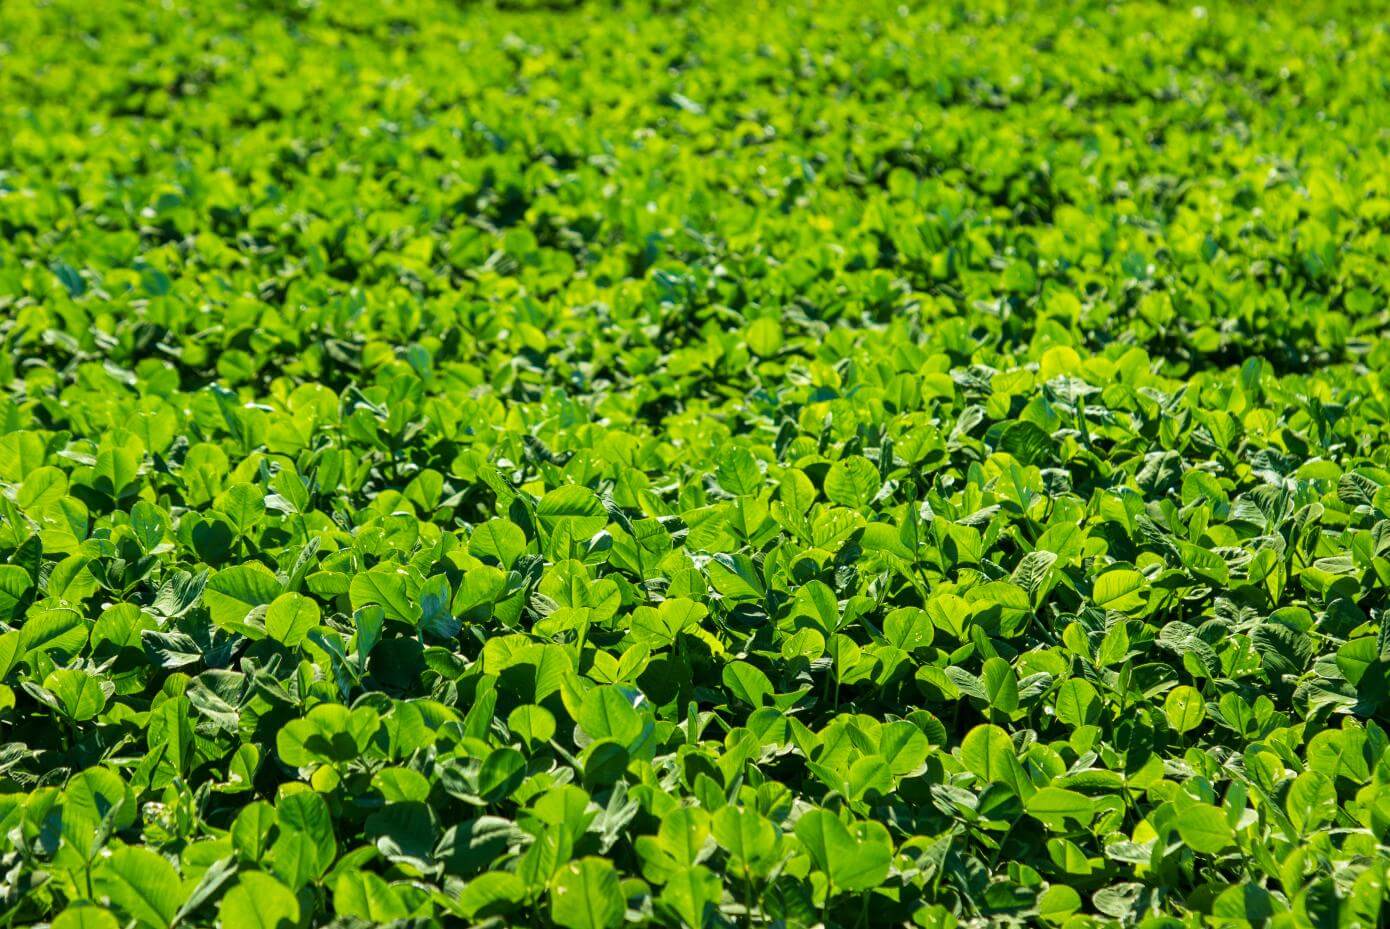 Field of Marco Polo white clover